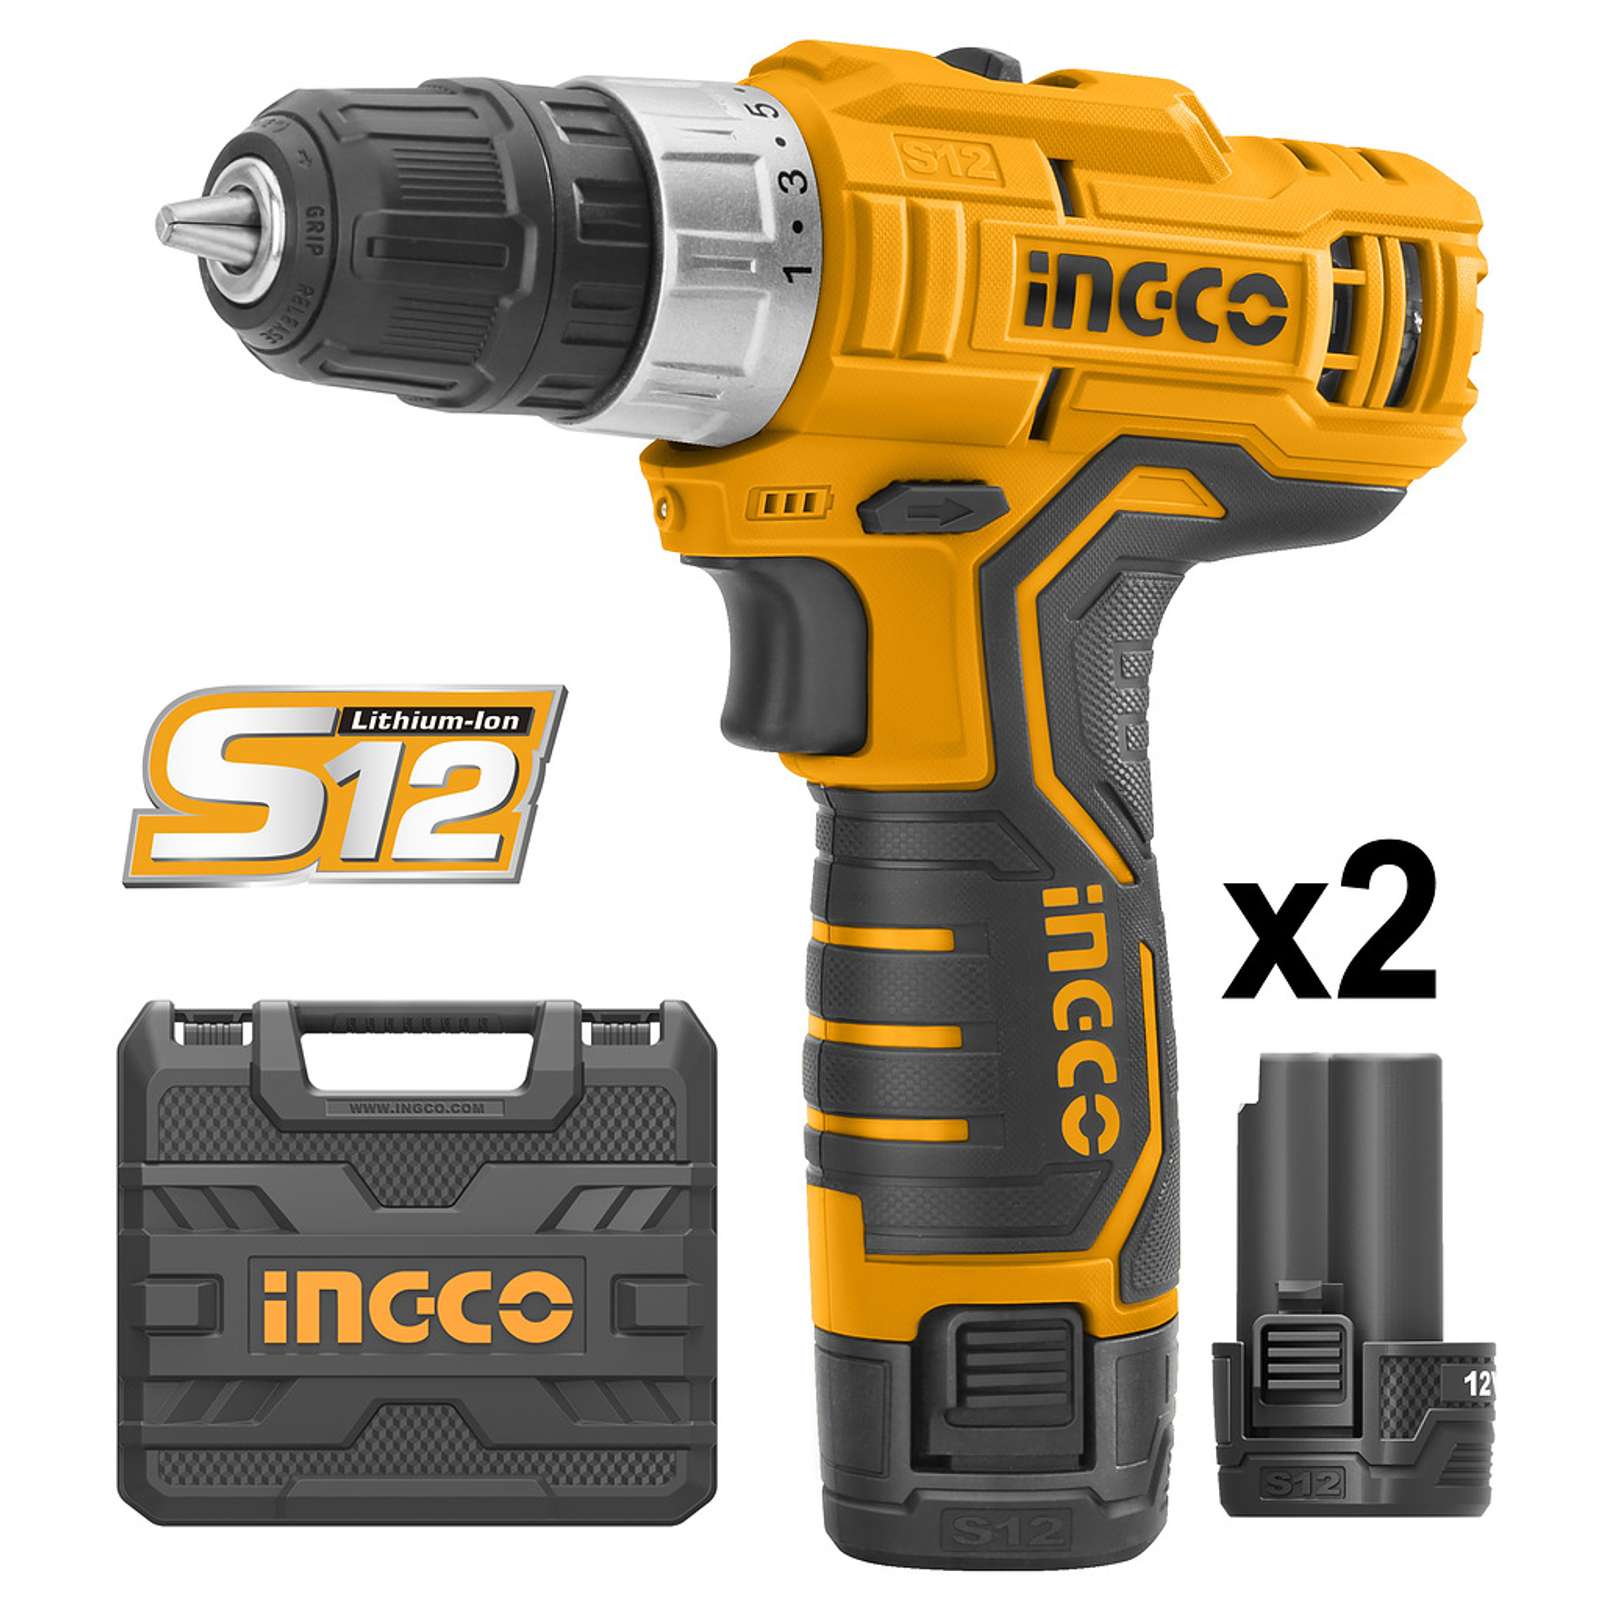 Ingco Lithium-Ion Cordless Drill 12V - CDLI1232 | Supply Master | Accra, Ghana Tools Building Steel Engineering Hardware tool